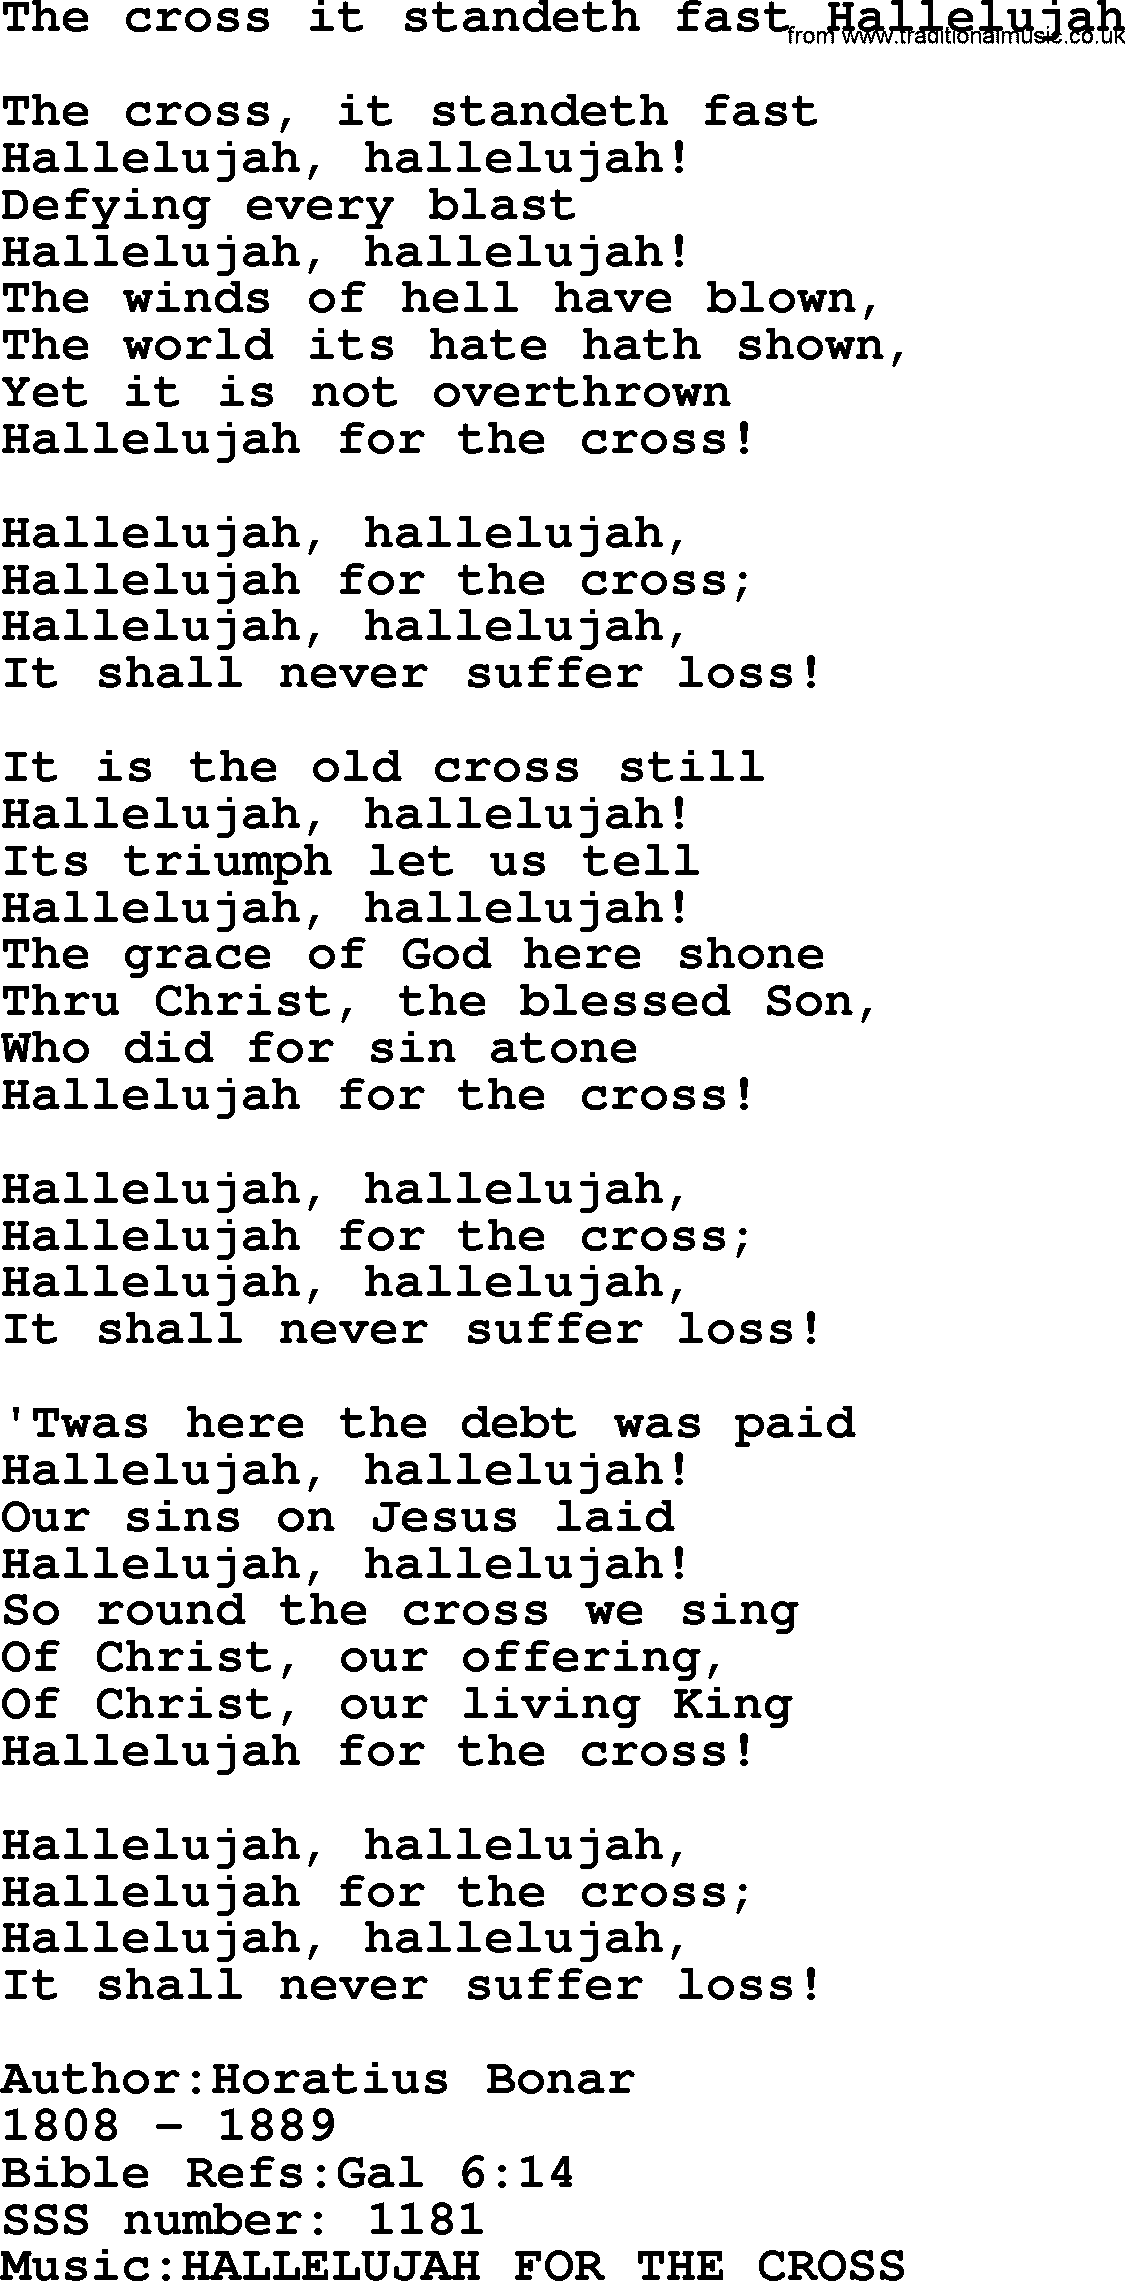 Sacred Songs and Solos complete, 1200 Hymns, title: The Cross It Standeth Fast Hallelujah, lyrics and PDF